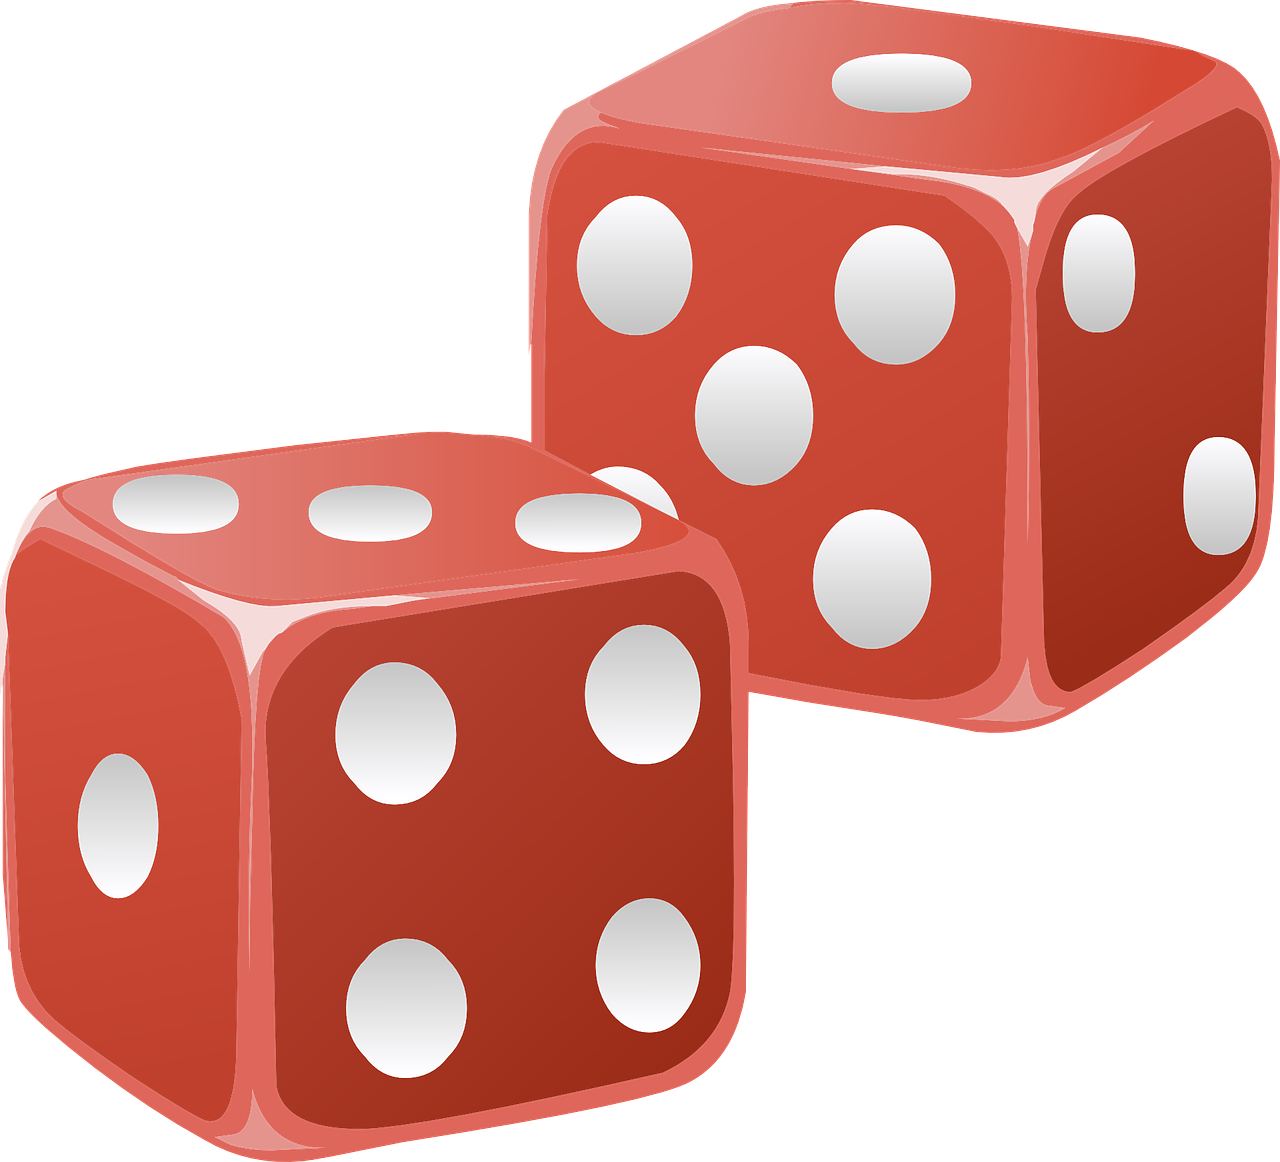 dice red cubes free photo